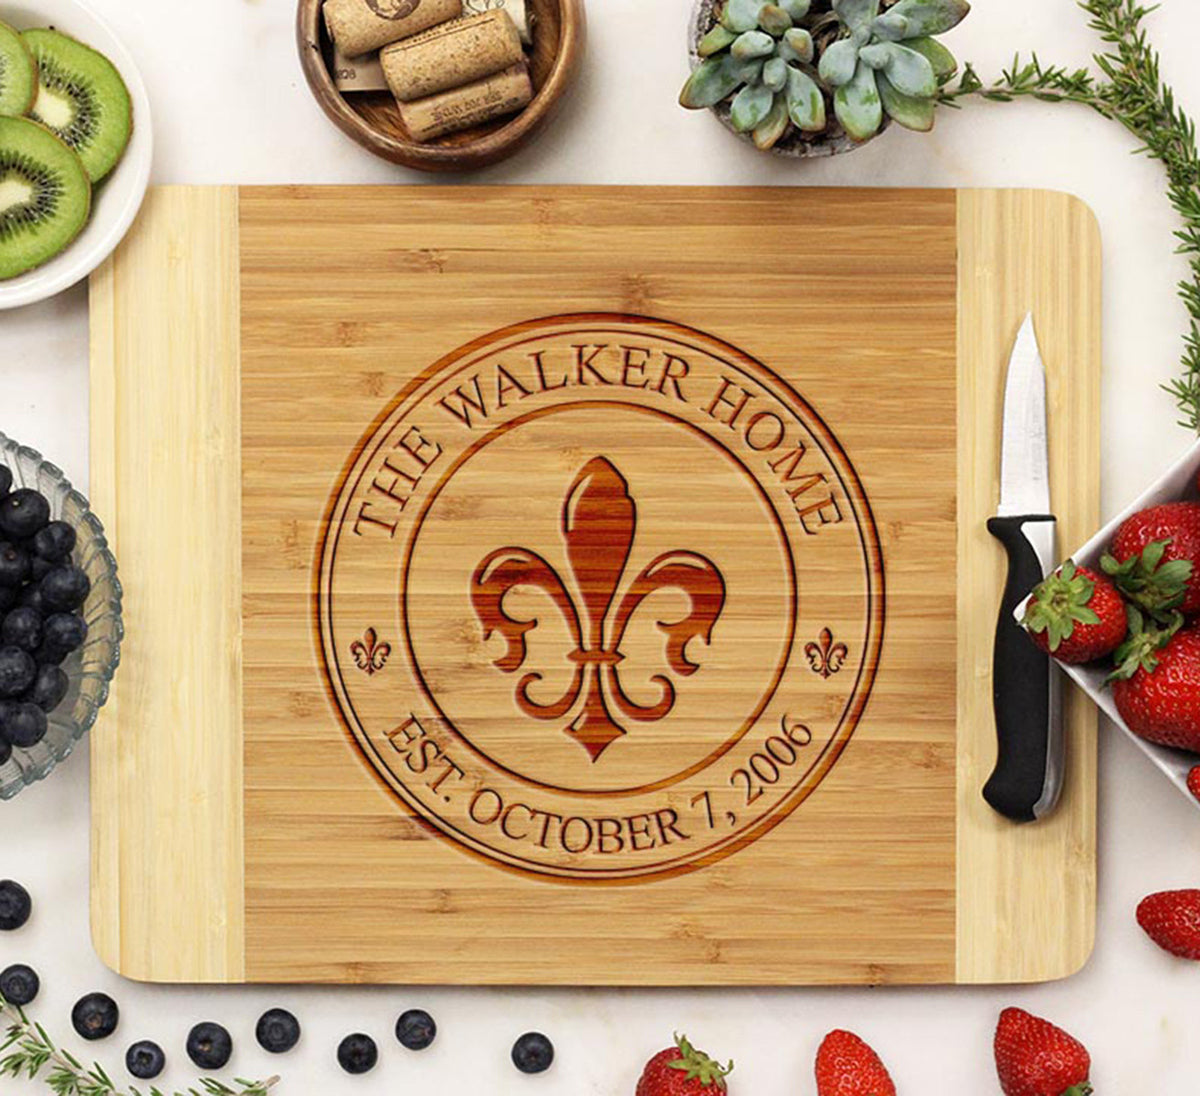 DIY – Painted cutting board – By Wilma